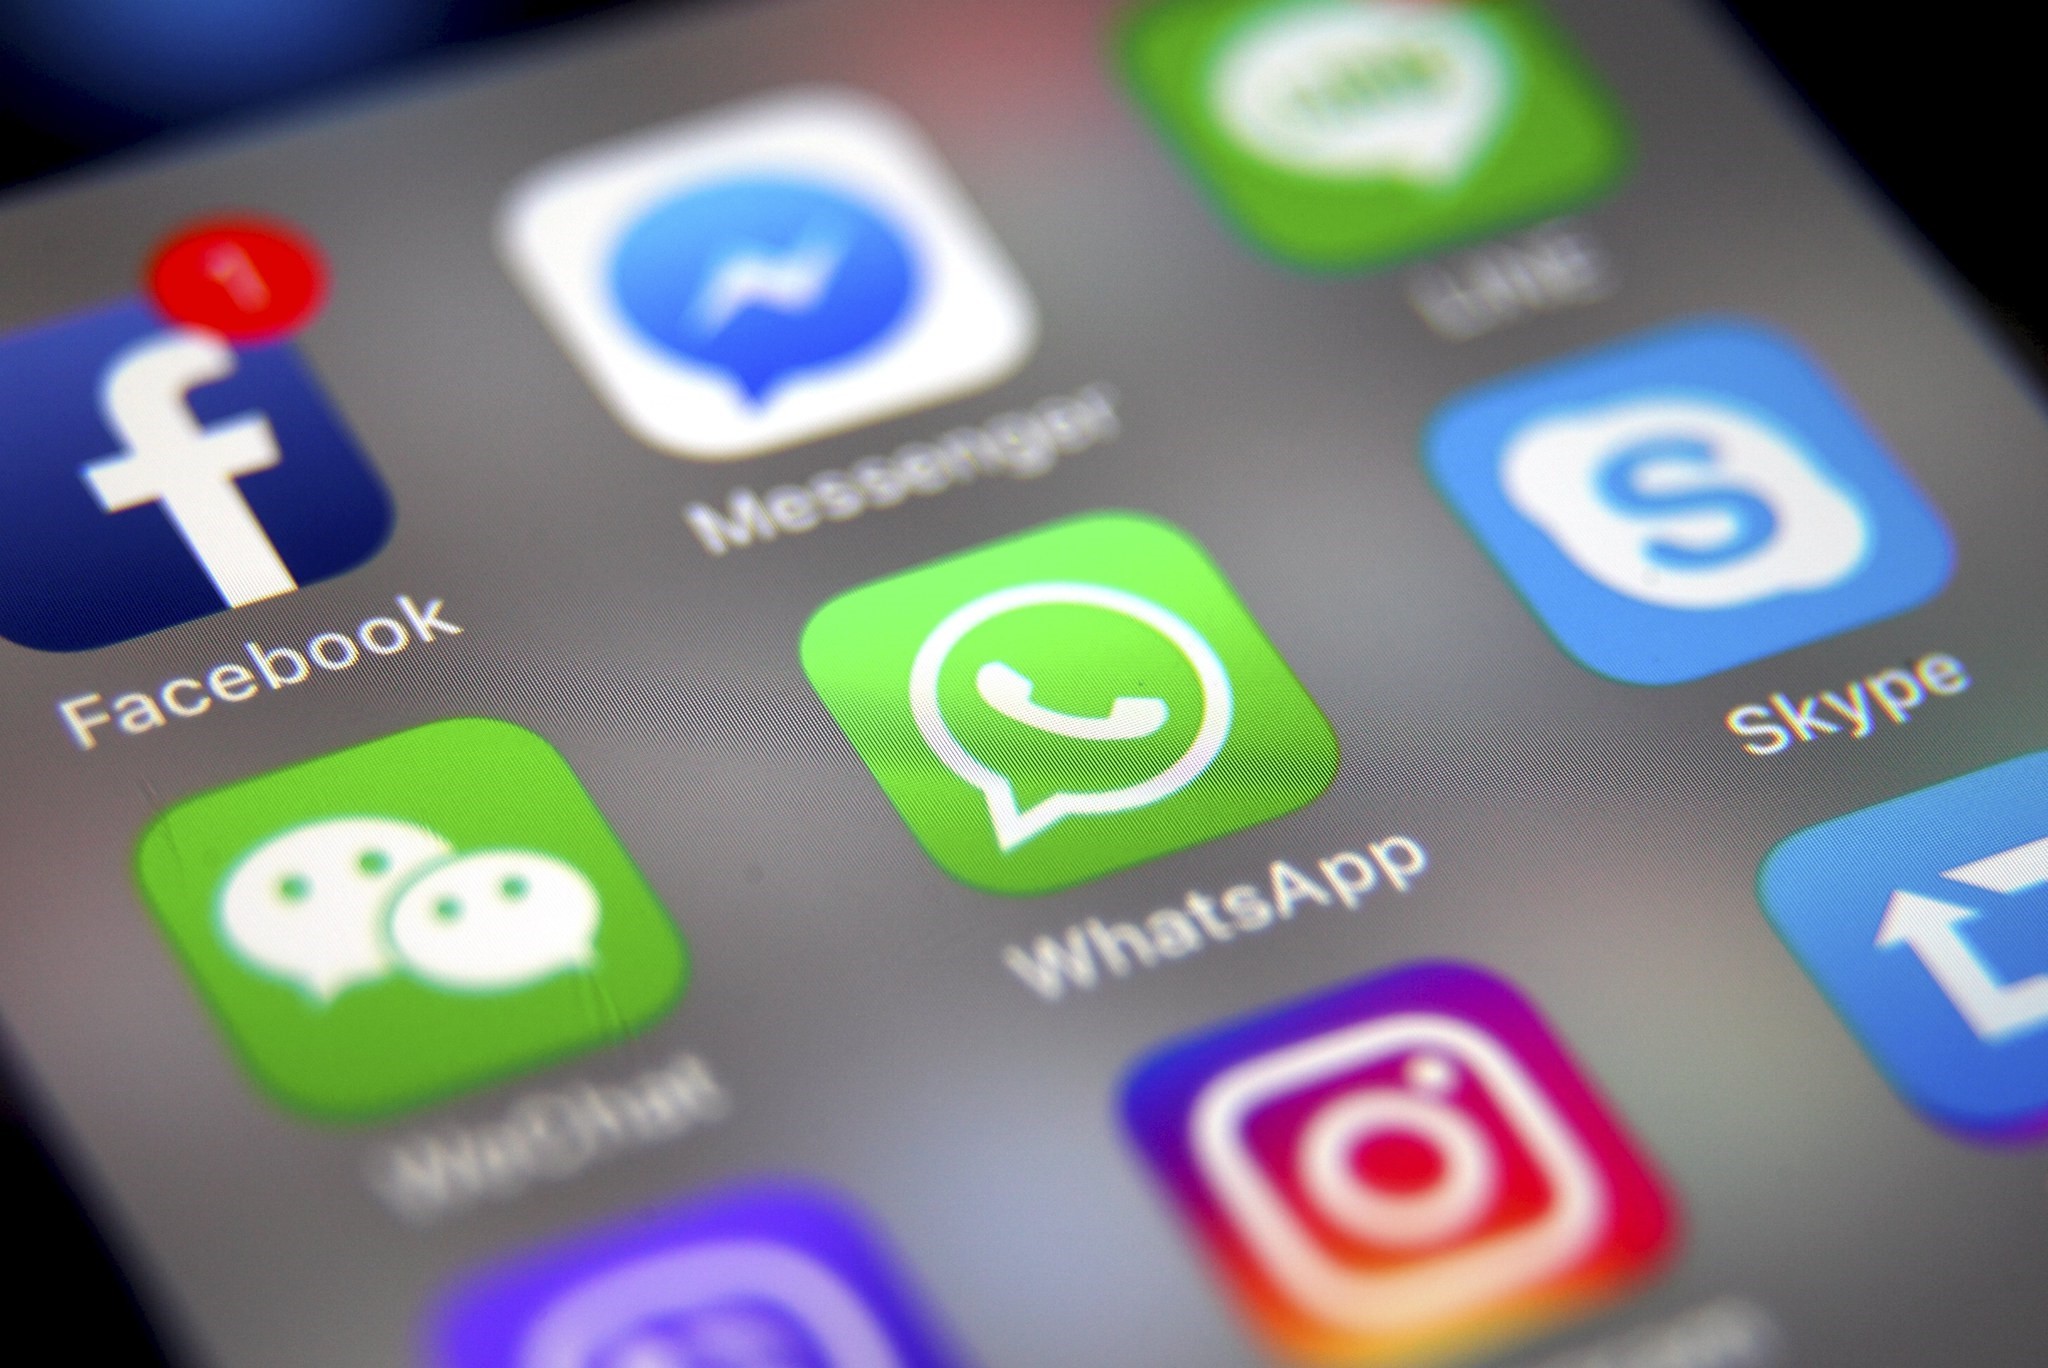 The logo of the messaging application WhatsApp (C) is pictured on a smartphone screen with the Facebook (top L) app logo in Taipei, 26 September 26 2017. (EPA Photo)